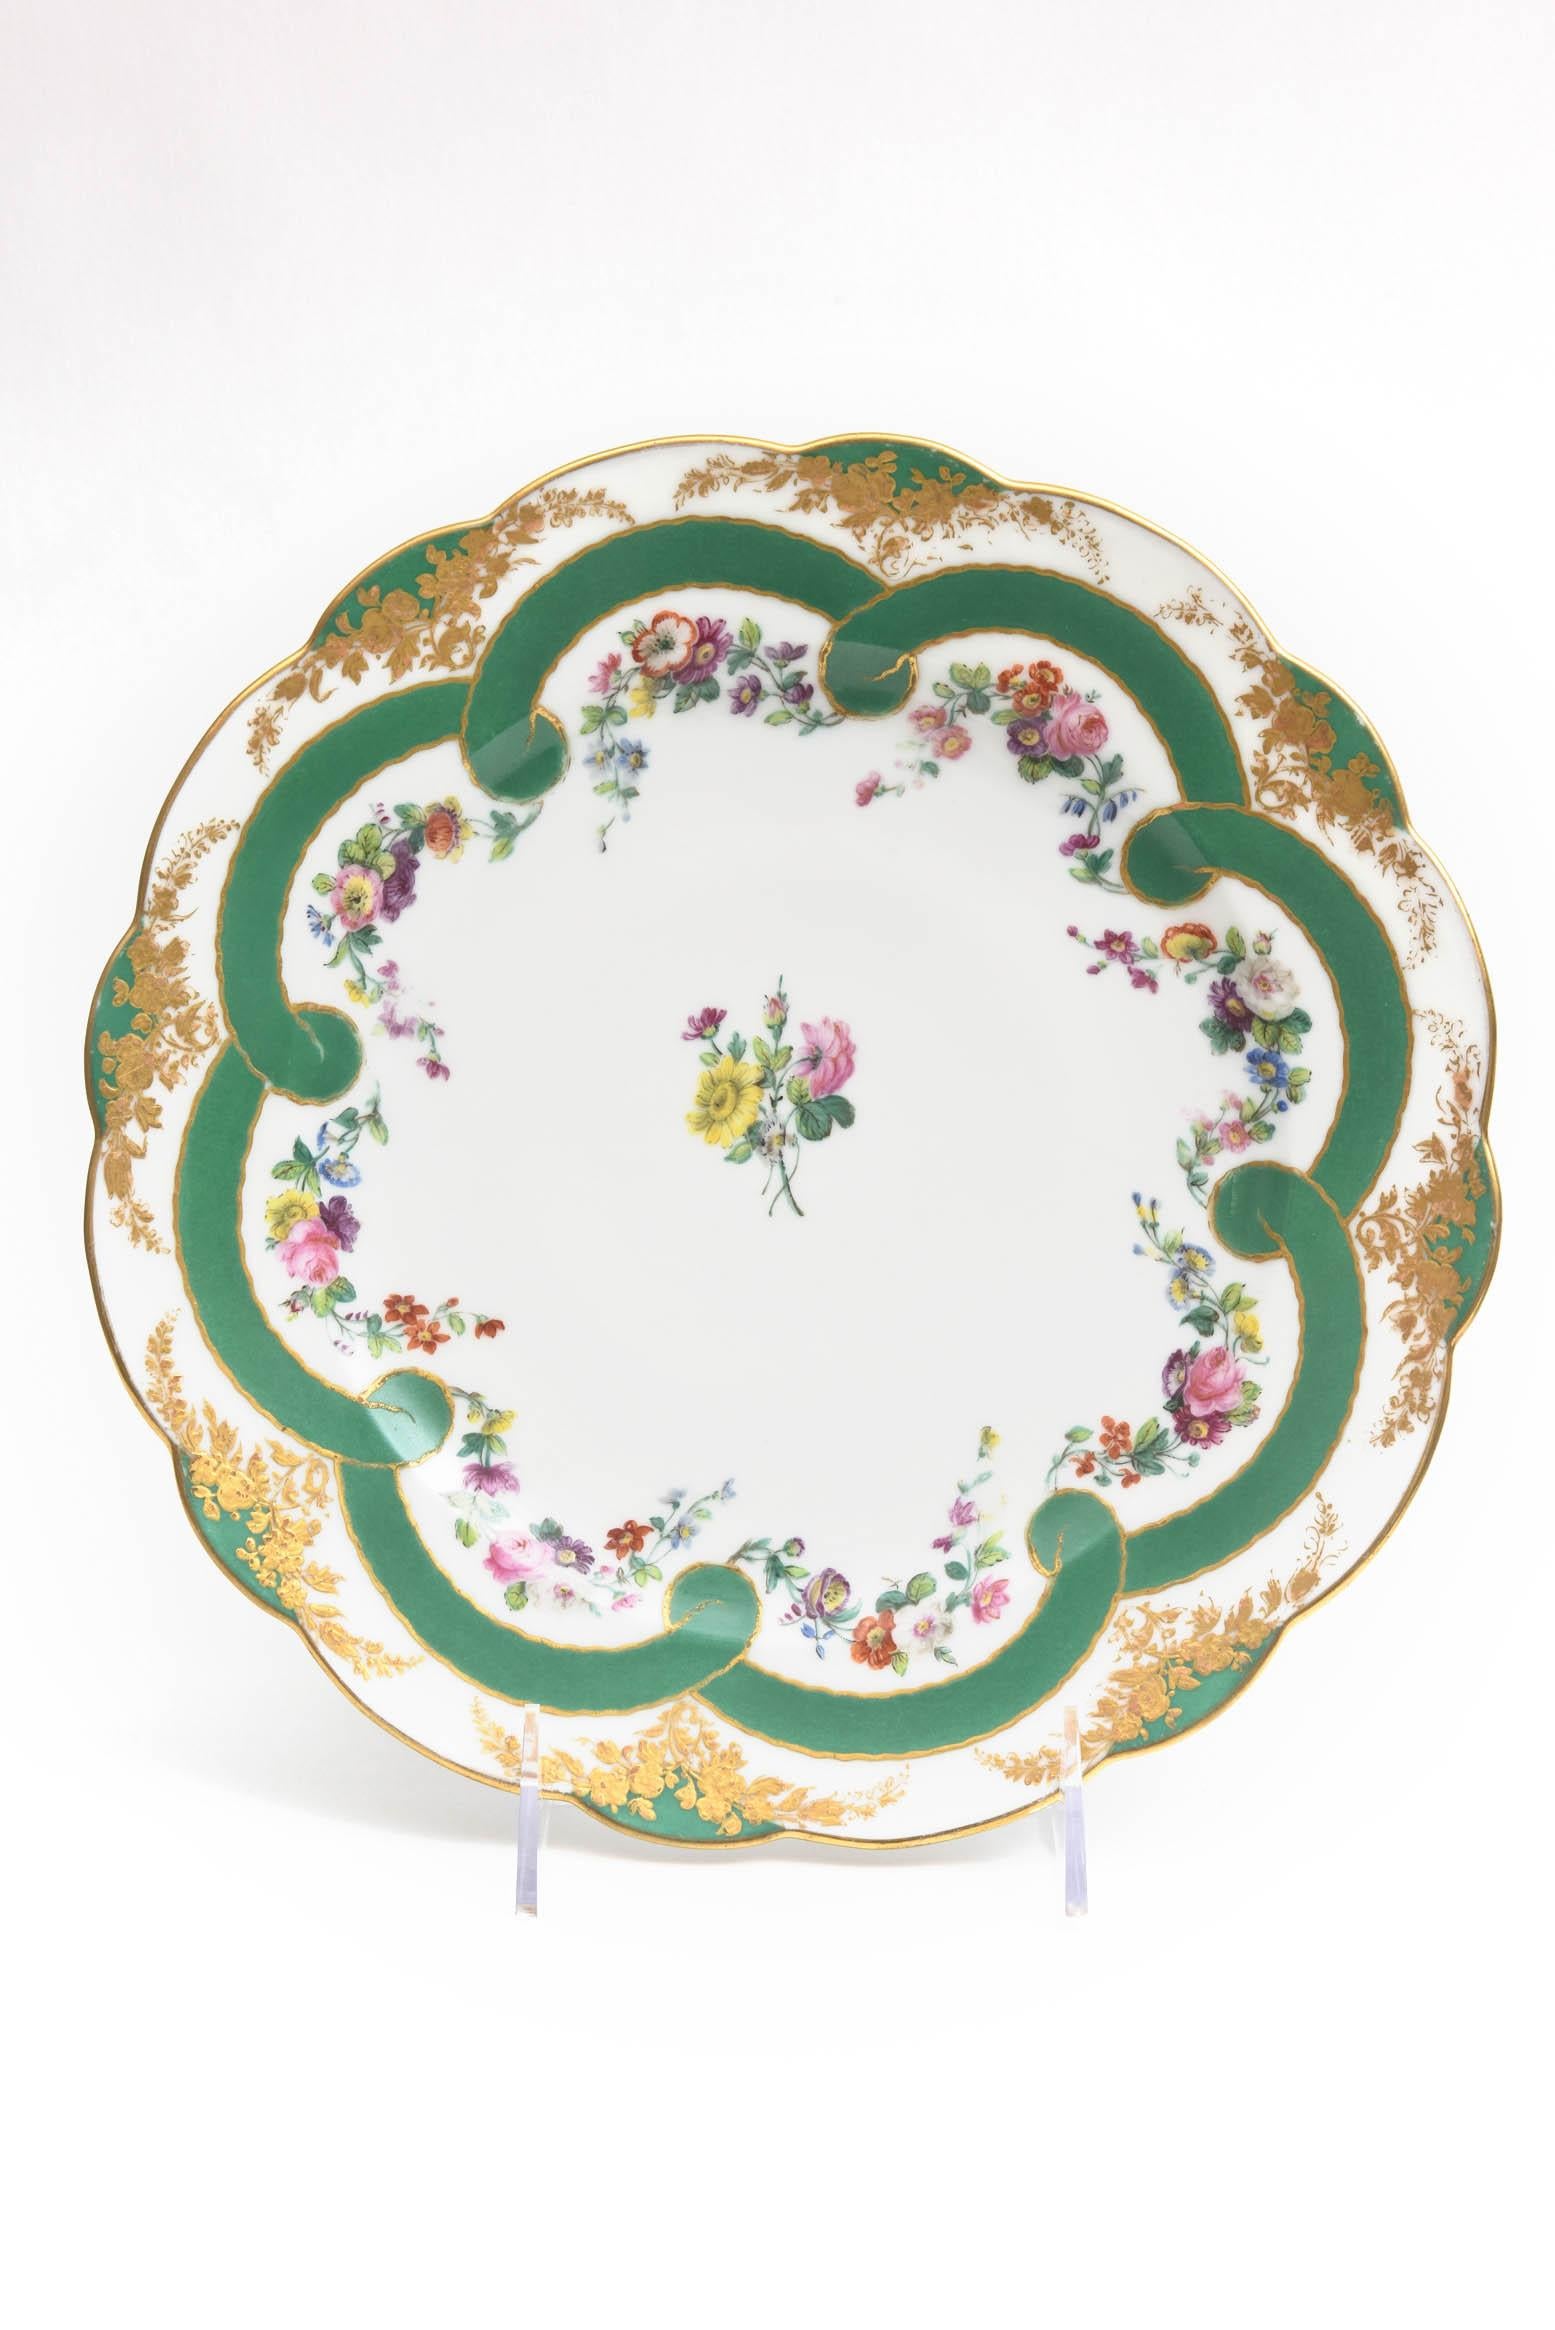 Hand-Crafted Set of 12 Museum Quality Feuillet Painted Old Paris Porcelain Plates, circa 1830